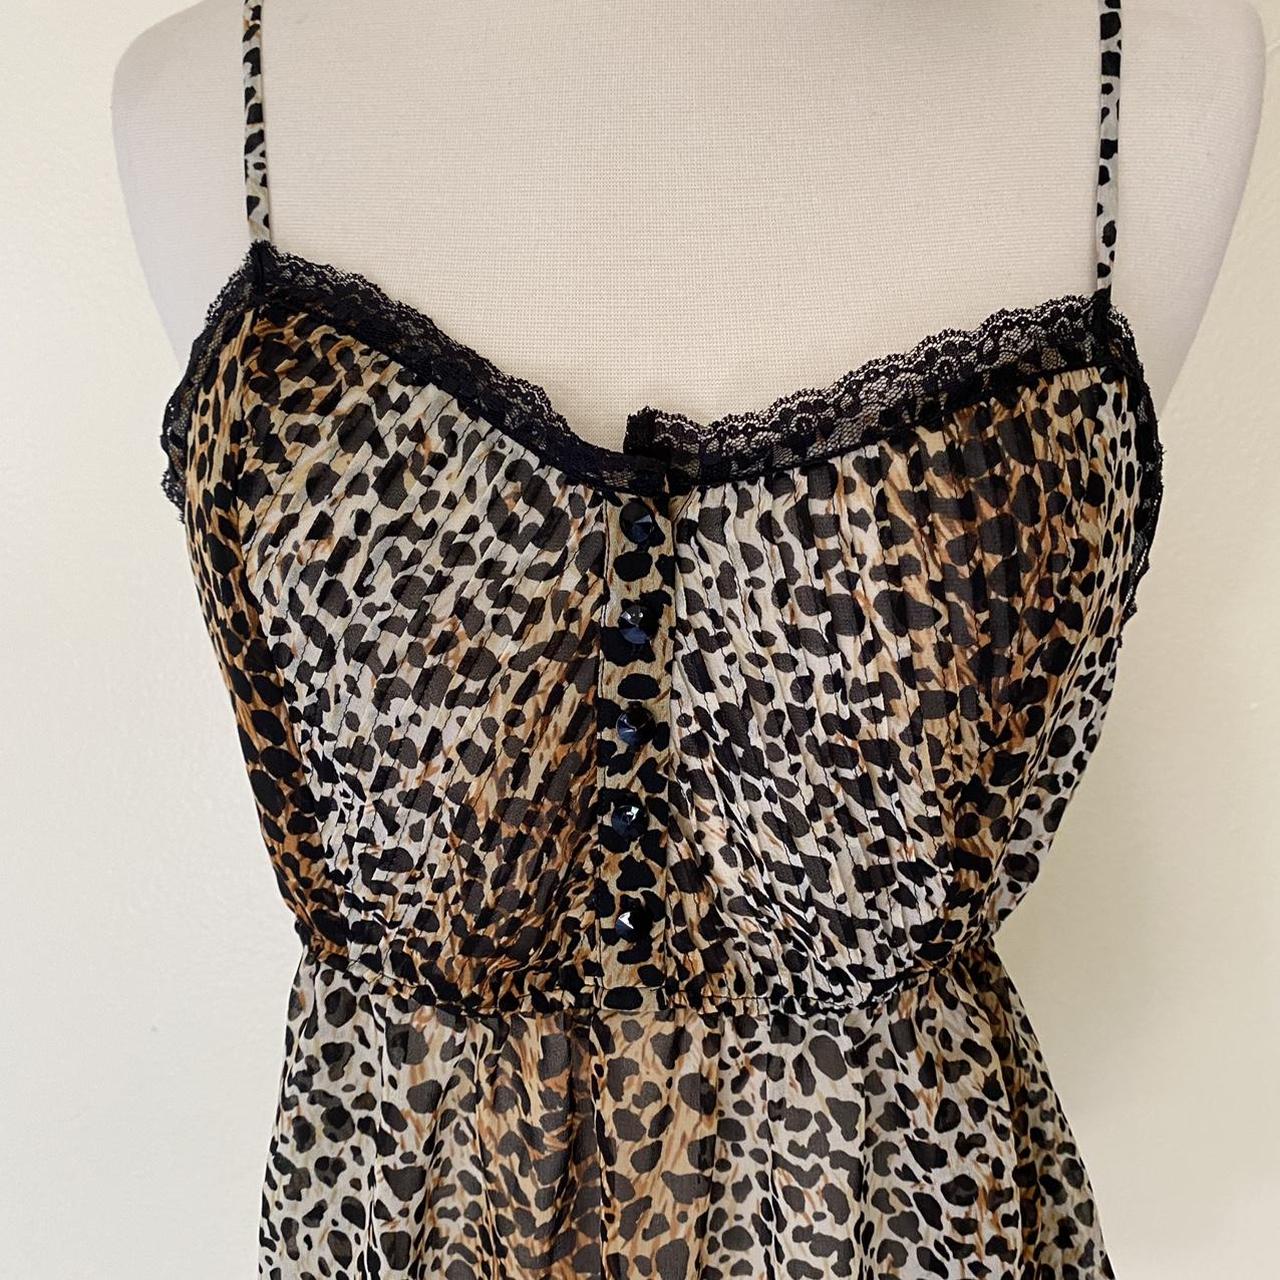 Late 2000s leopard print babydoll cami top from... - Depop